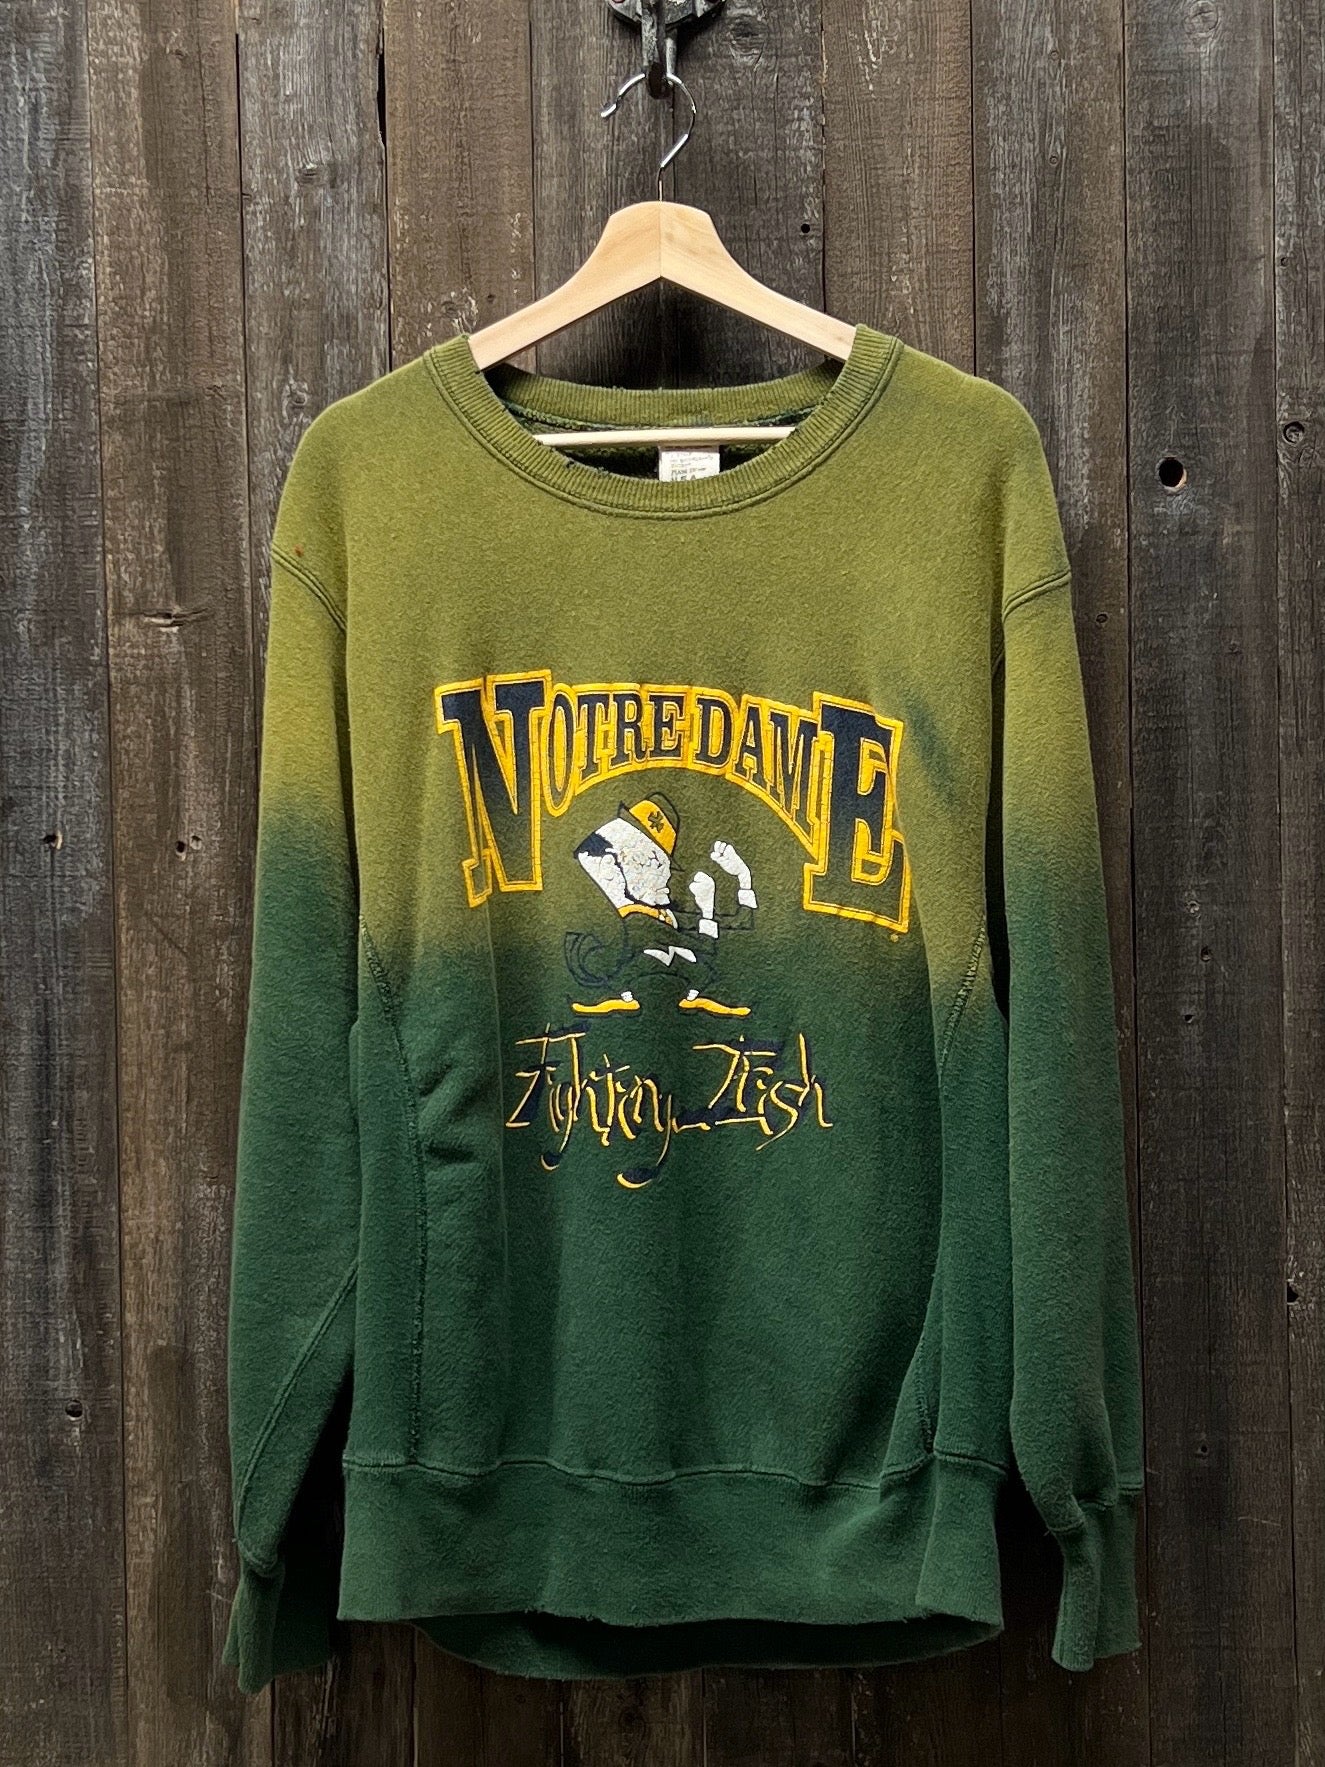 Notre Dame Sweatshirt - M/L-Customize Your Embroidery Wording